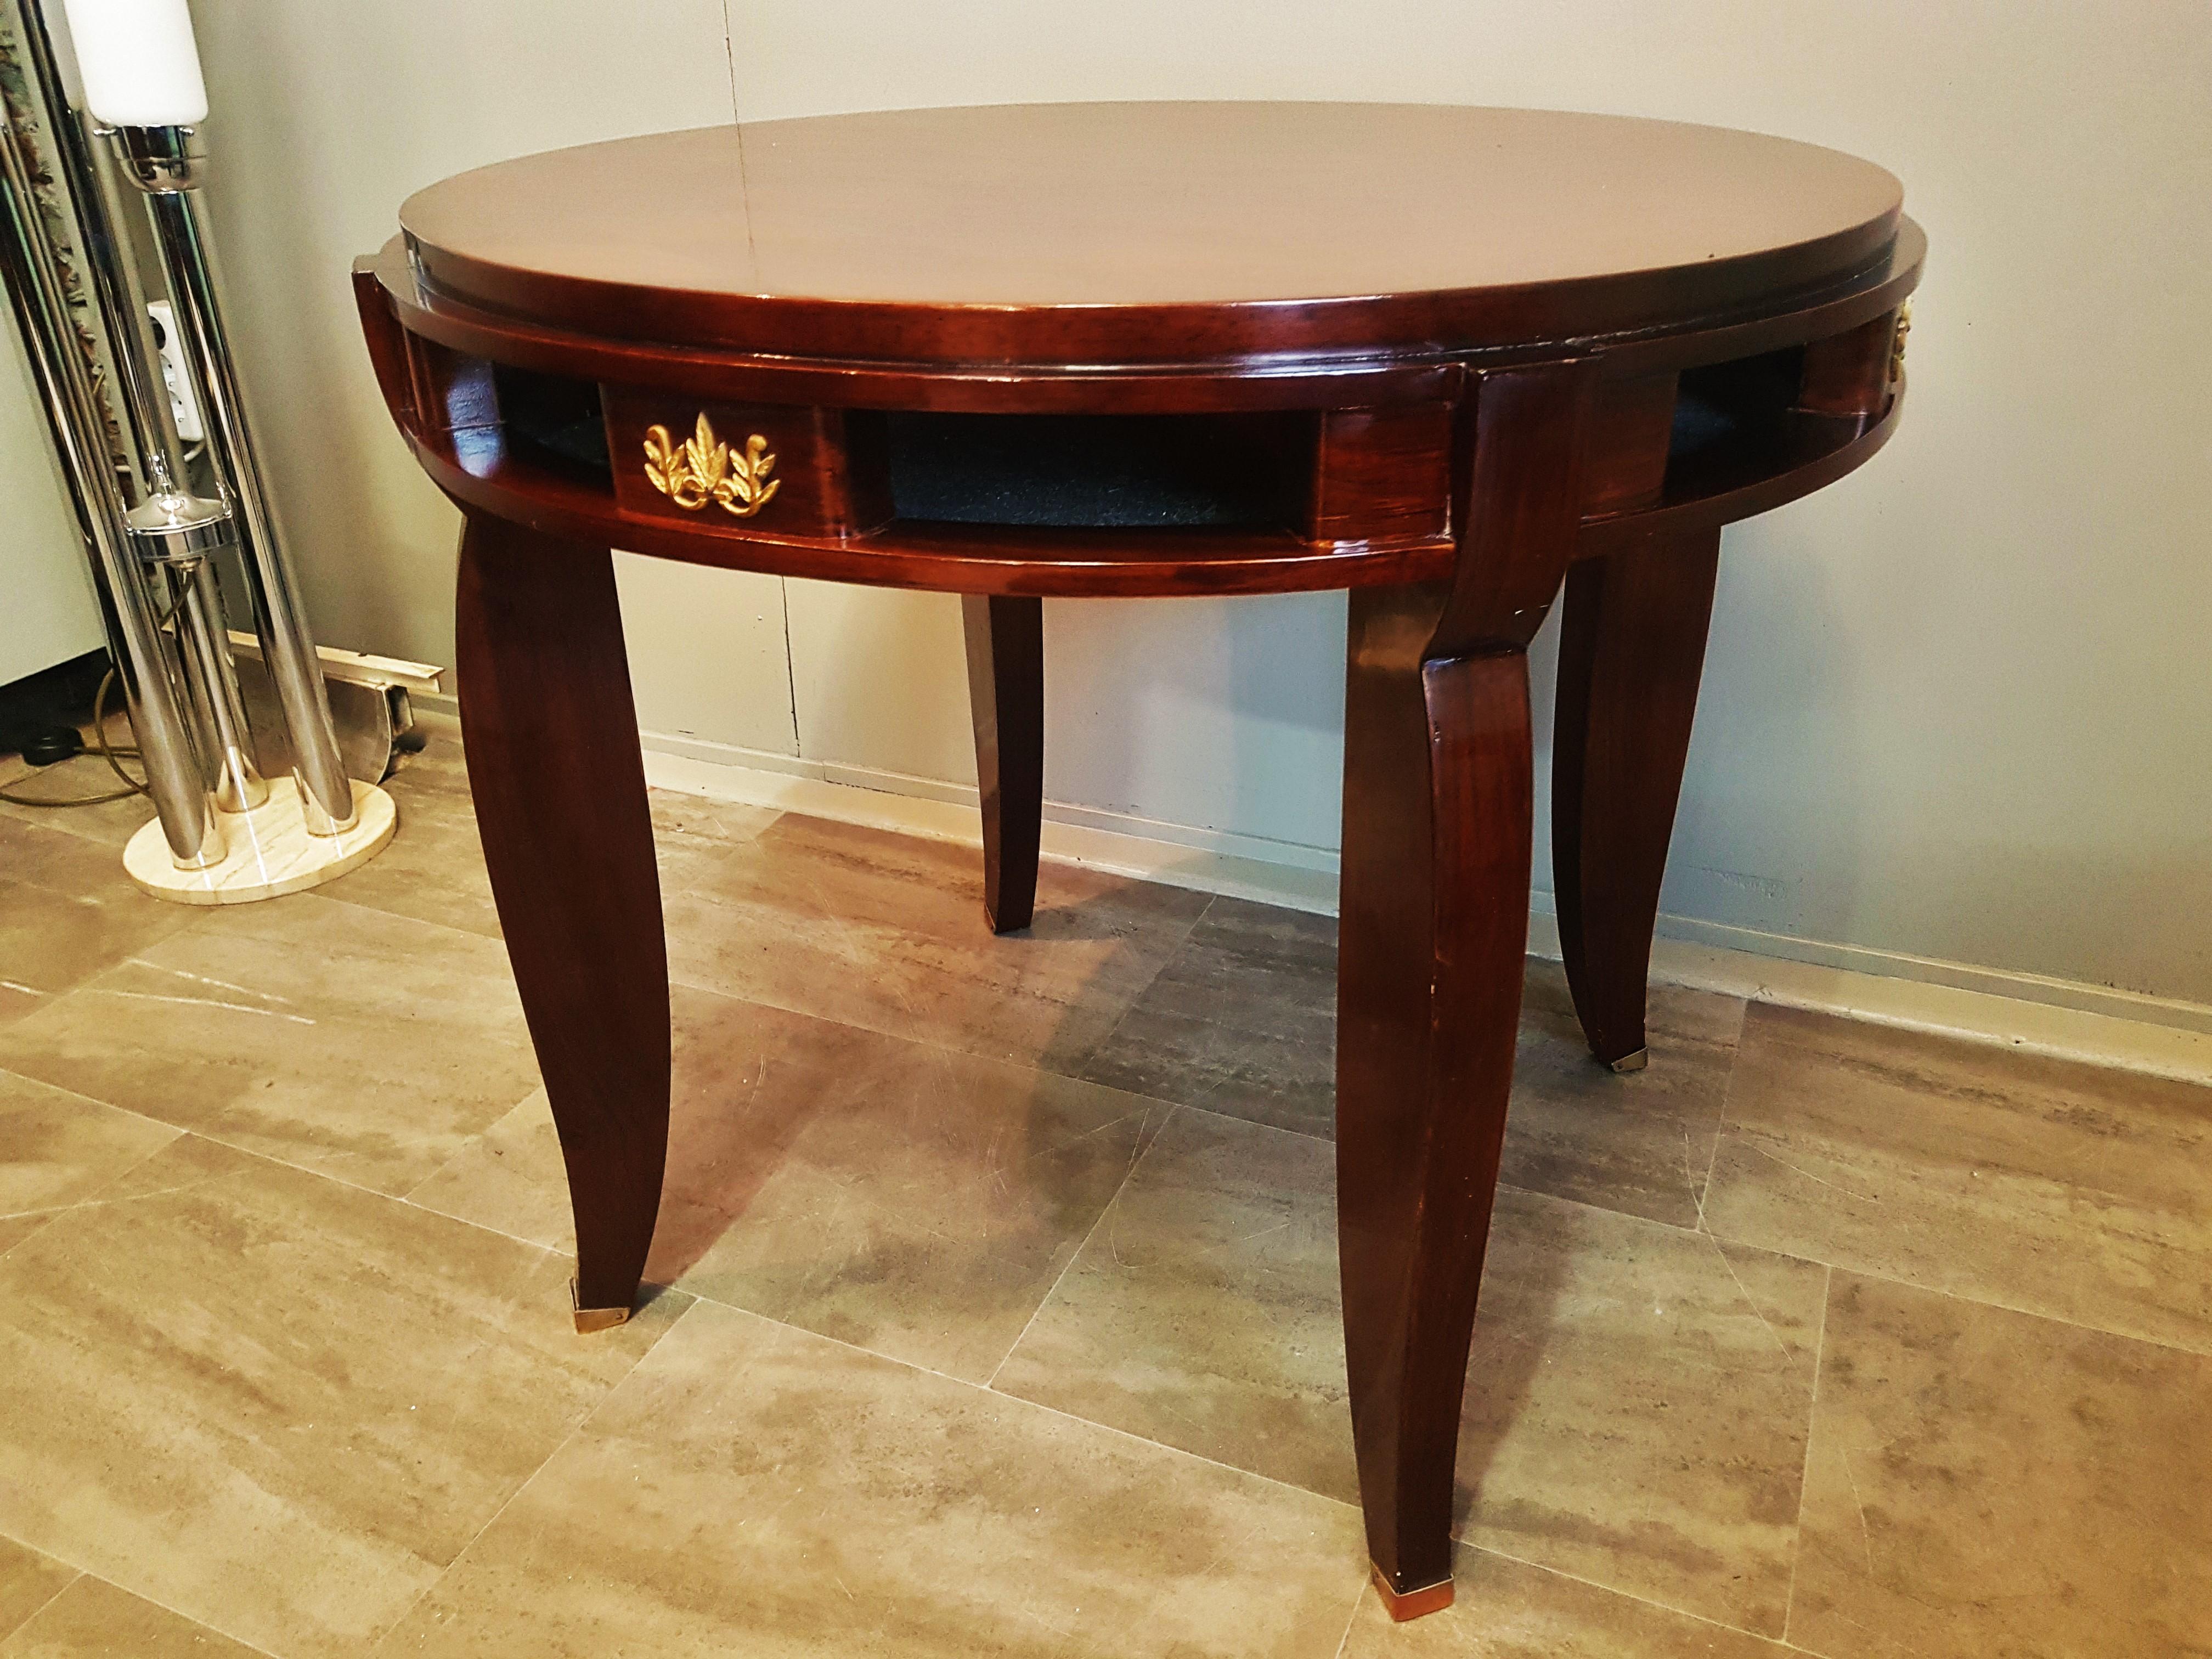 Art Deco gueridon center table by Jules Leleu, France, 1930.

Mahogany wood, marquetry. 4 floral golden details. 4 brass feet sabots.

Fully restored. High gloss laquor, hand polished.



Jules Leleu was a French furniture designer famous